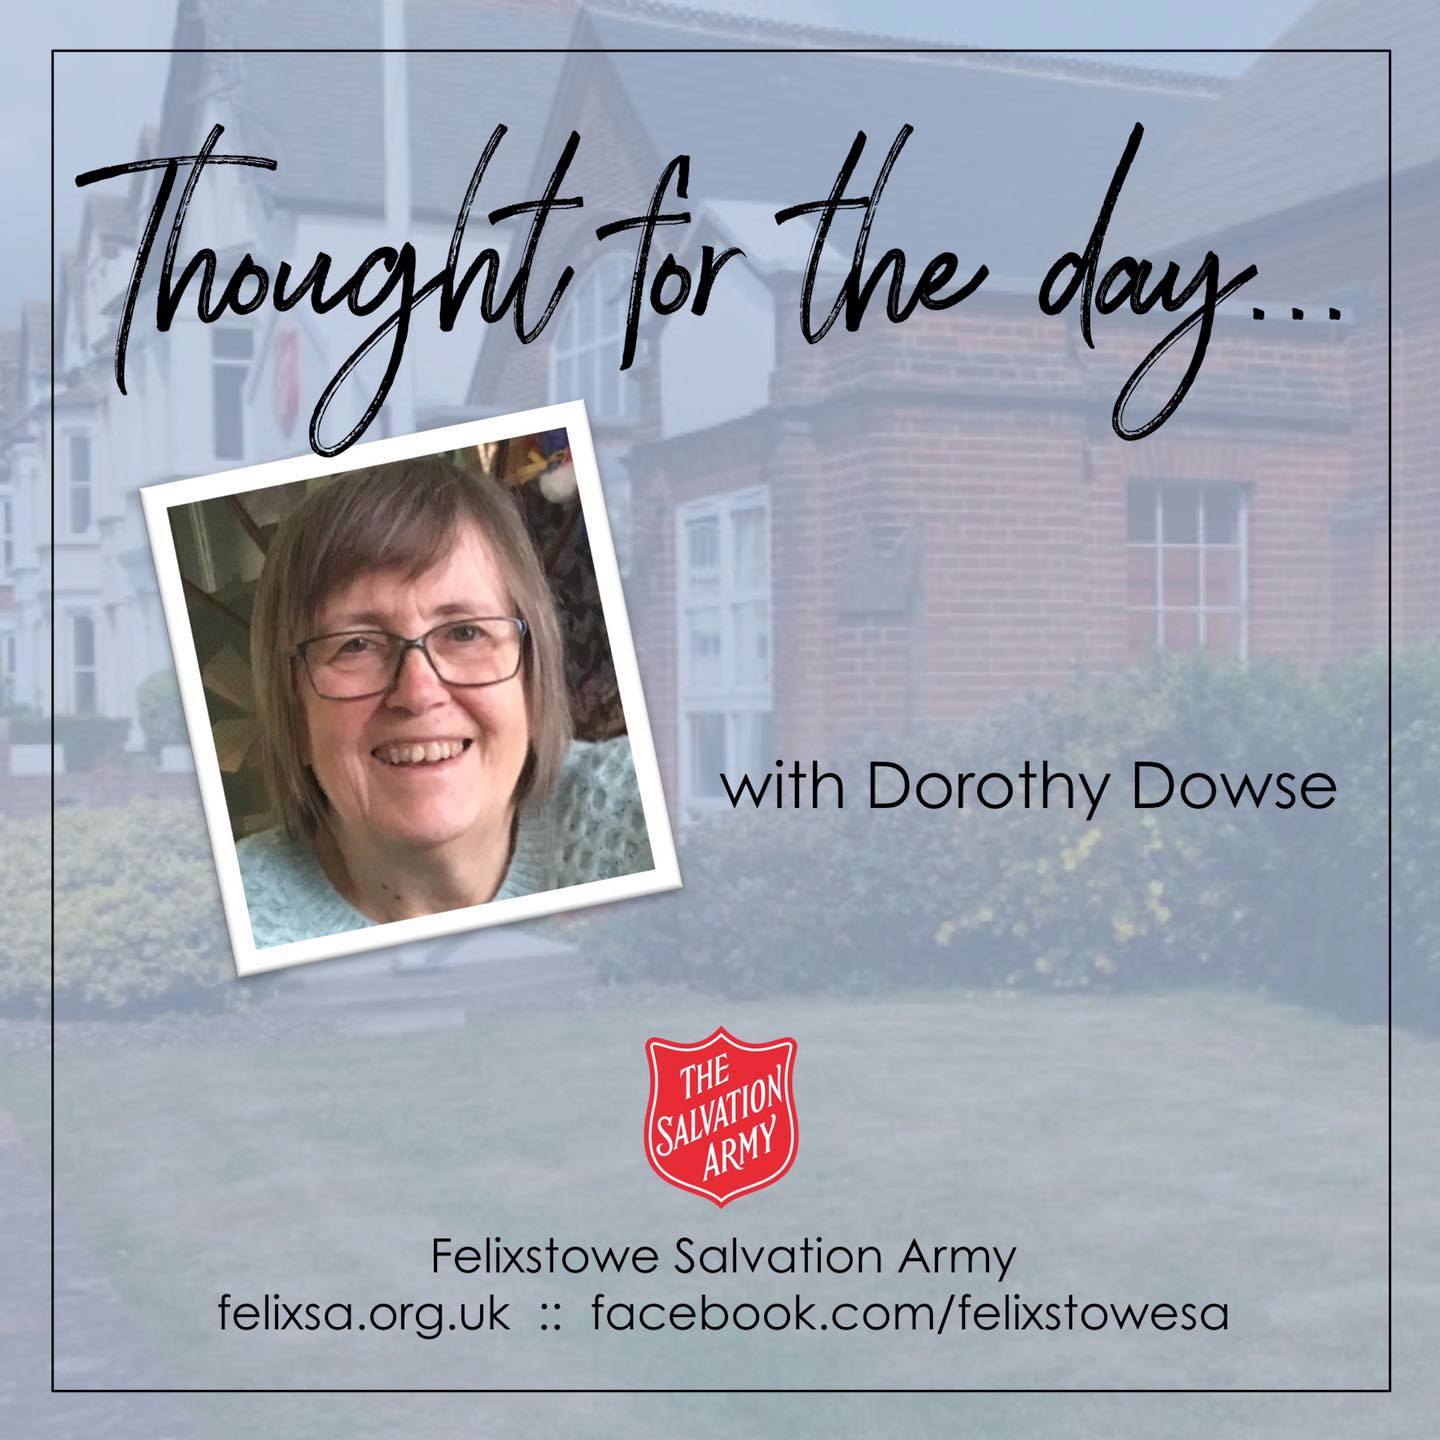 Thought for the Day with Dorothy Dowse